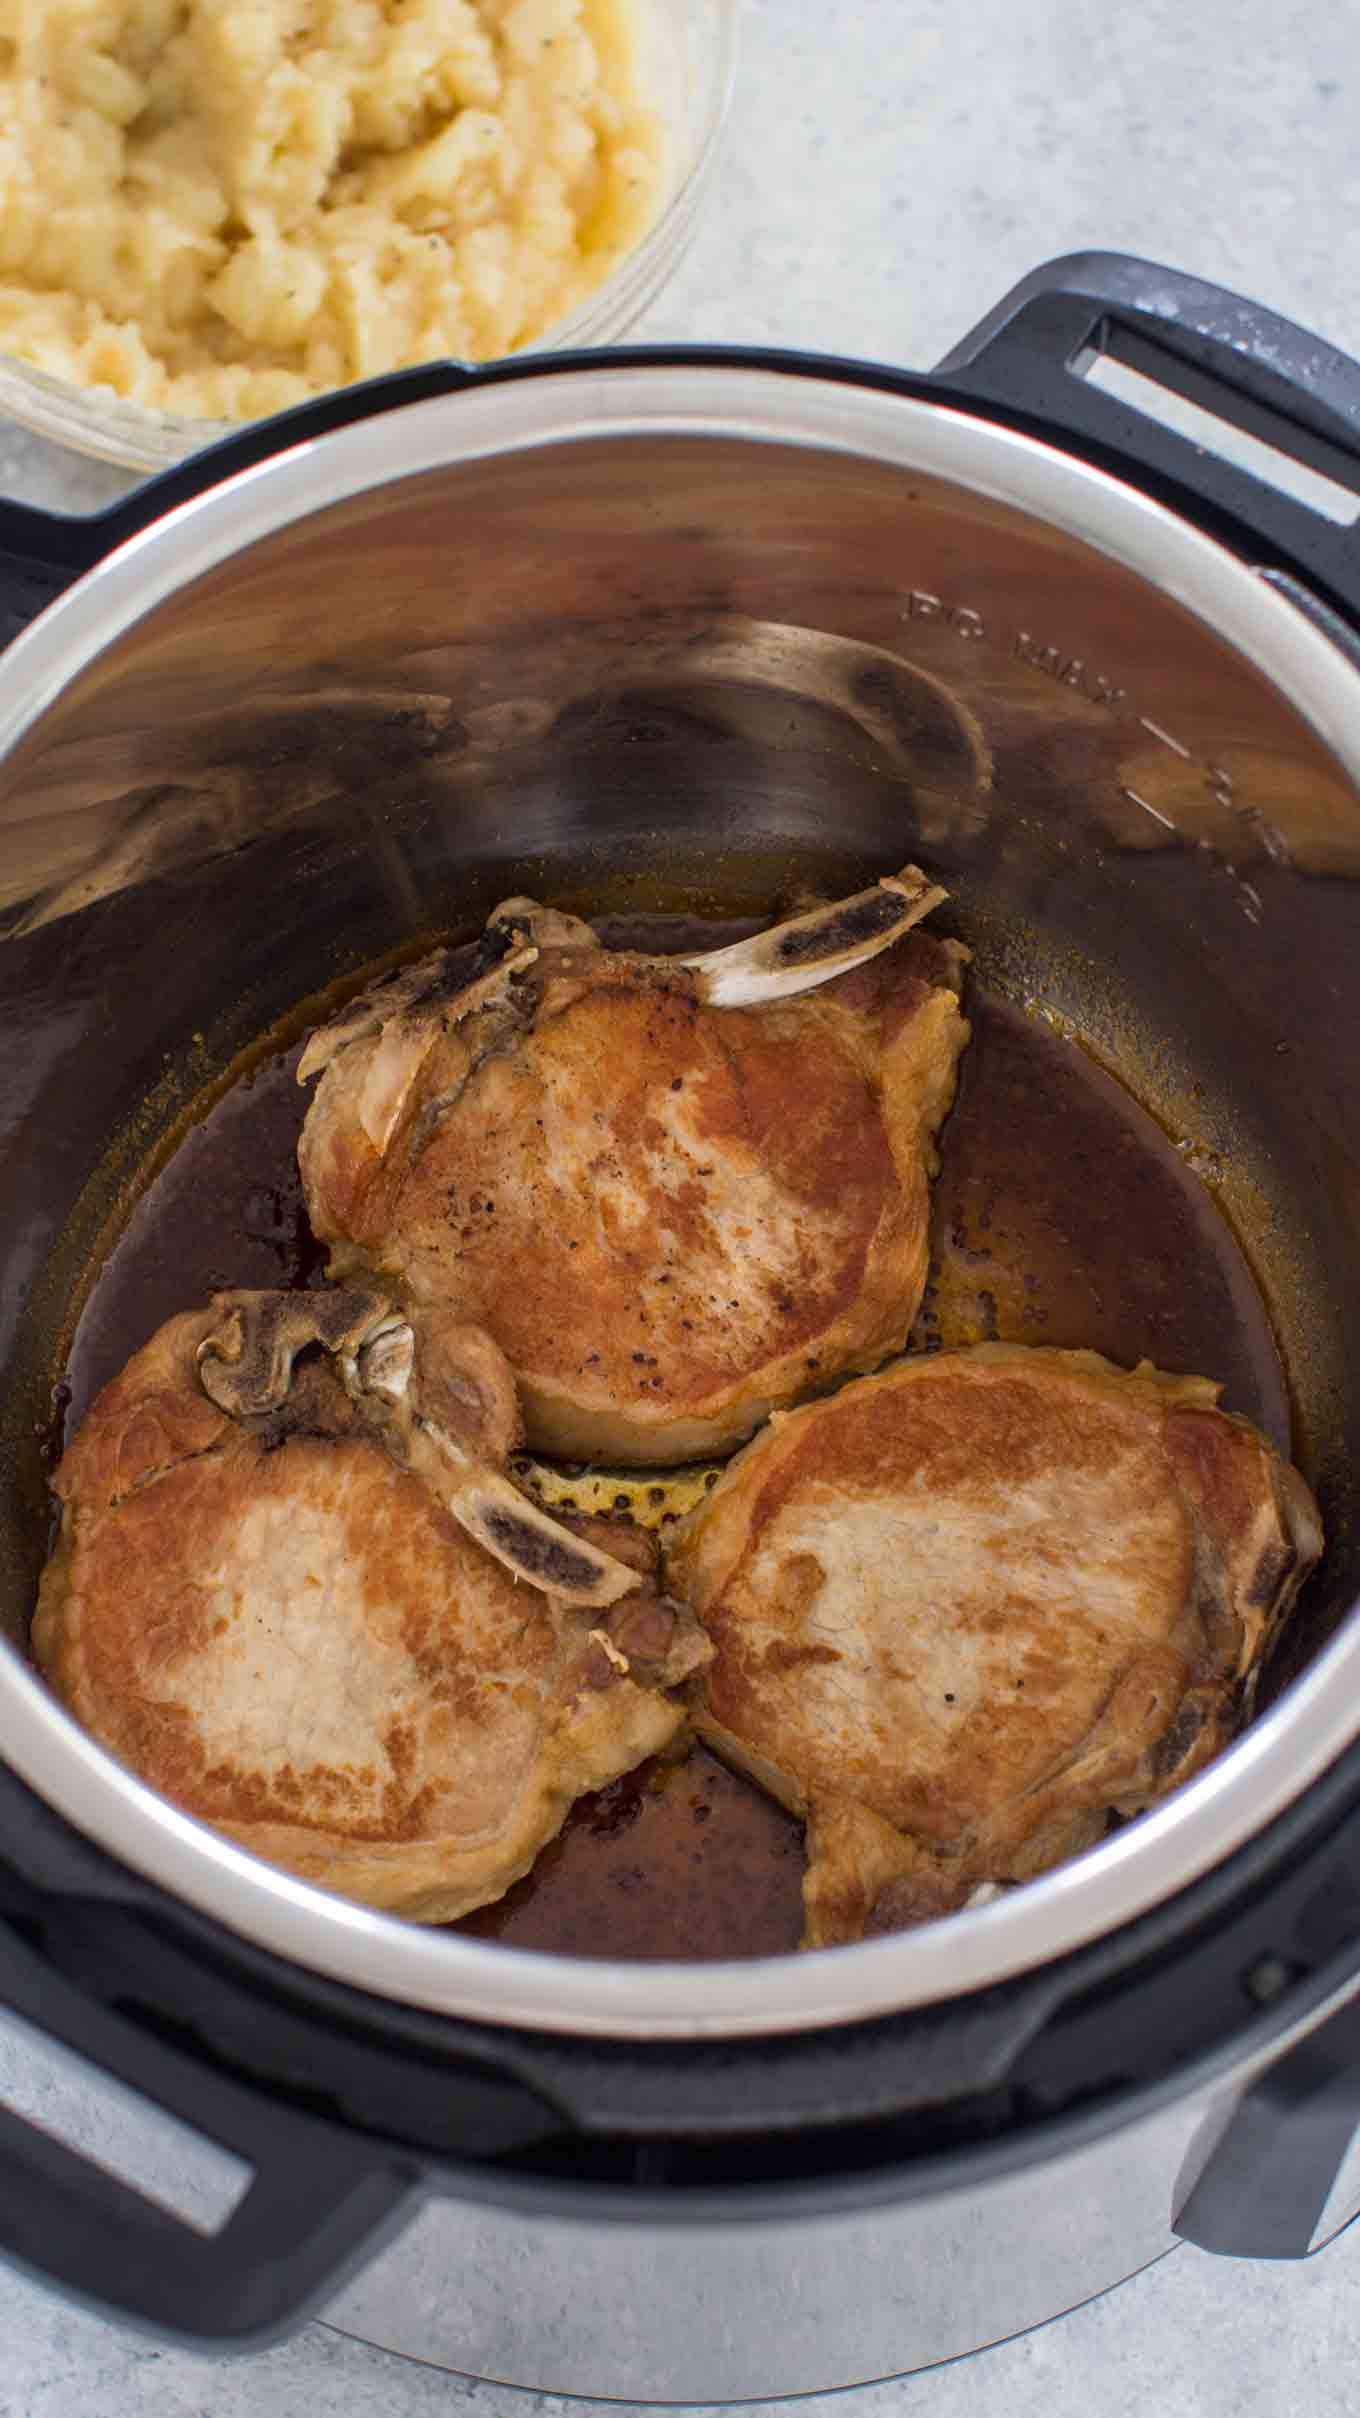 The 25 Best Ideas for Instant Pot Pork Chops and Apples - Best Recipes ...